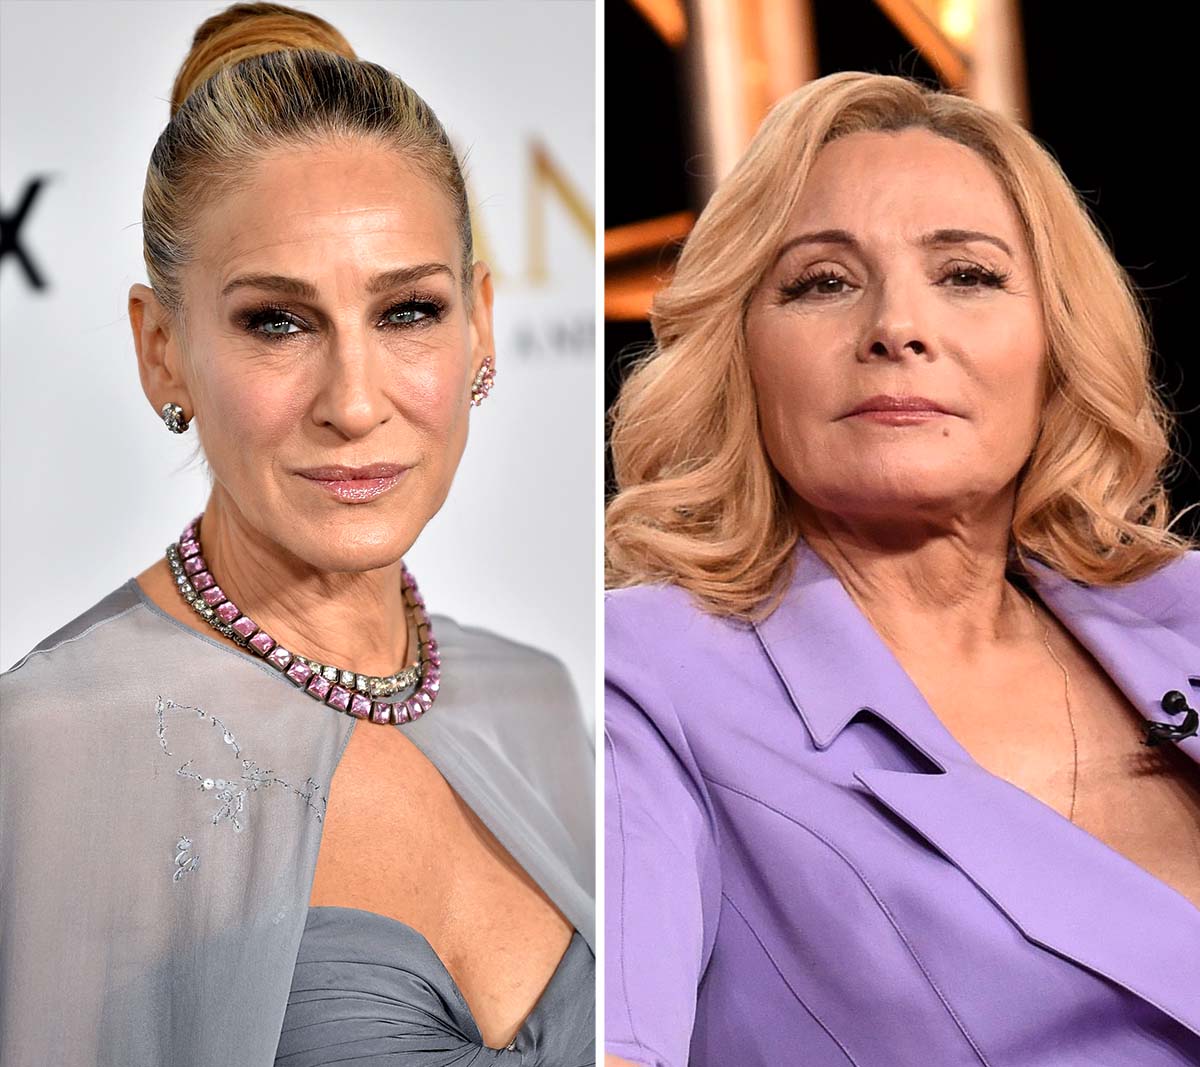 Sarah Jessica Parker Gets Real About Very Painful Kim Cattrall Drama